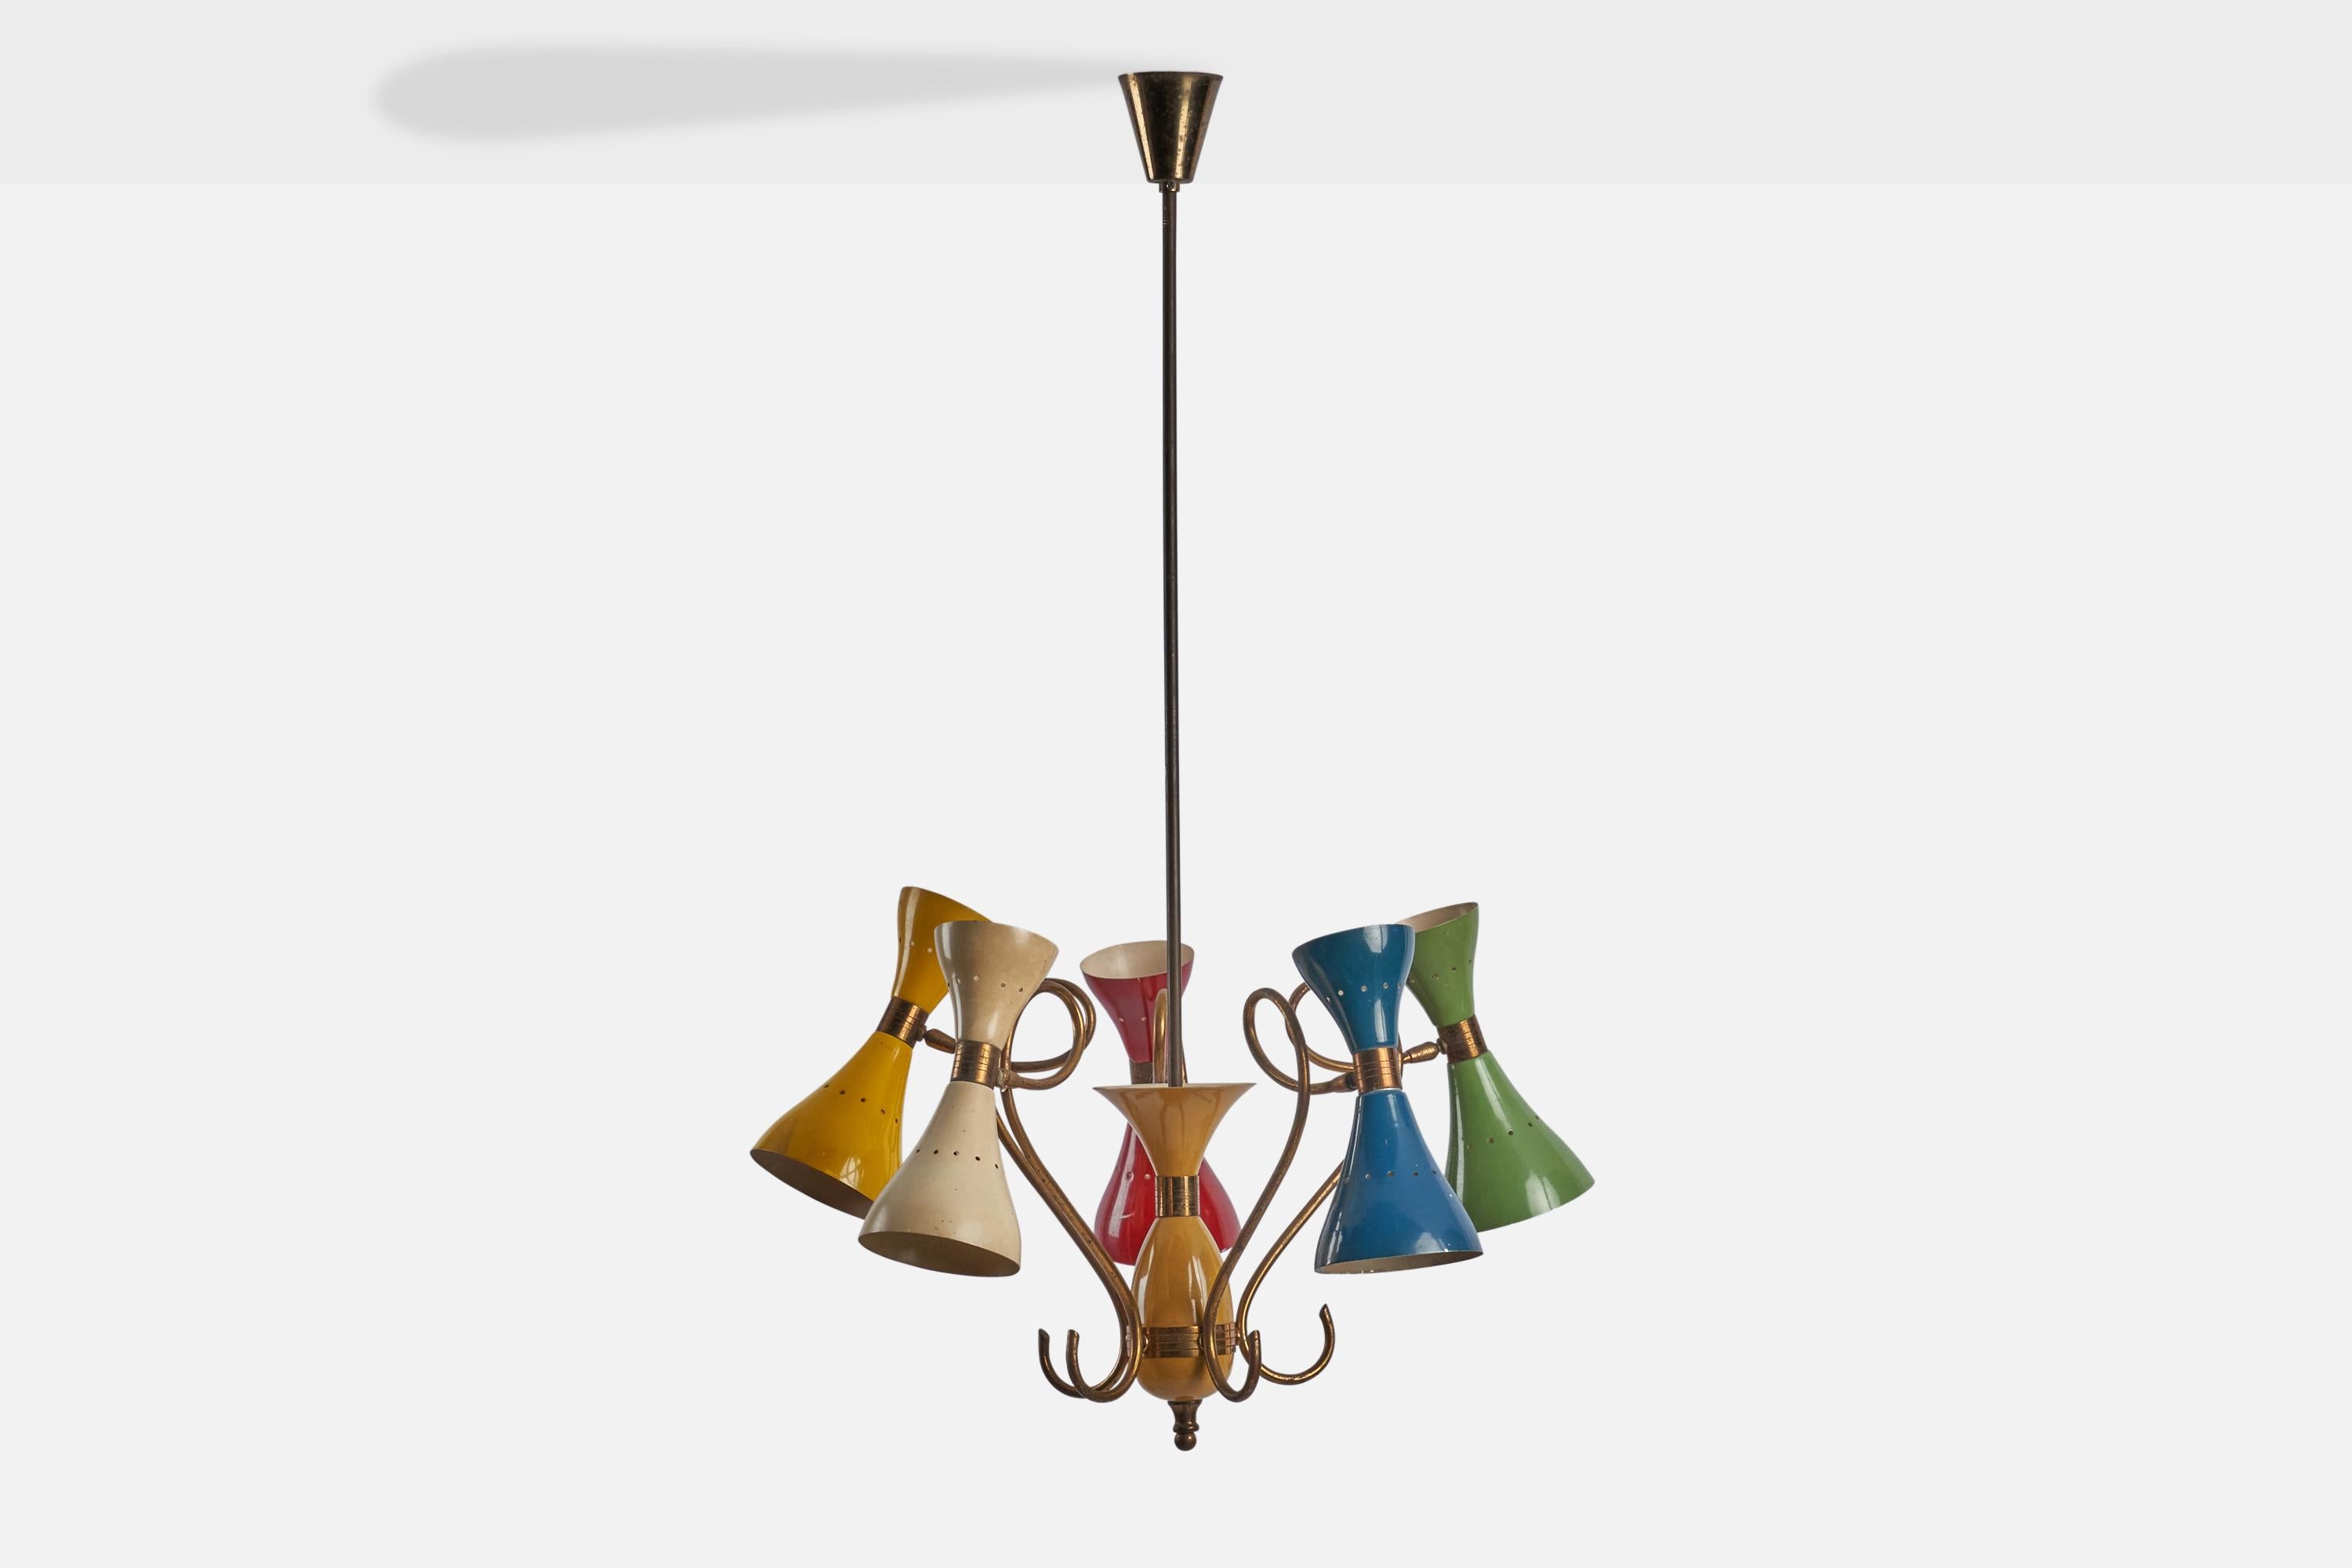 
An adjustable multi-color-lacquered metal and brass chandelier designed and produced in Italy, 1950s.
Overall Dimensions (inches): 33.5” H x 22.25” D
Bulb Specifications: E-26 Bulb
Number of Sockets: 1
All lighting will be converted for US usage.